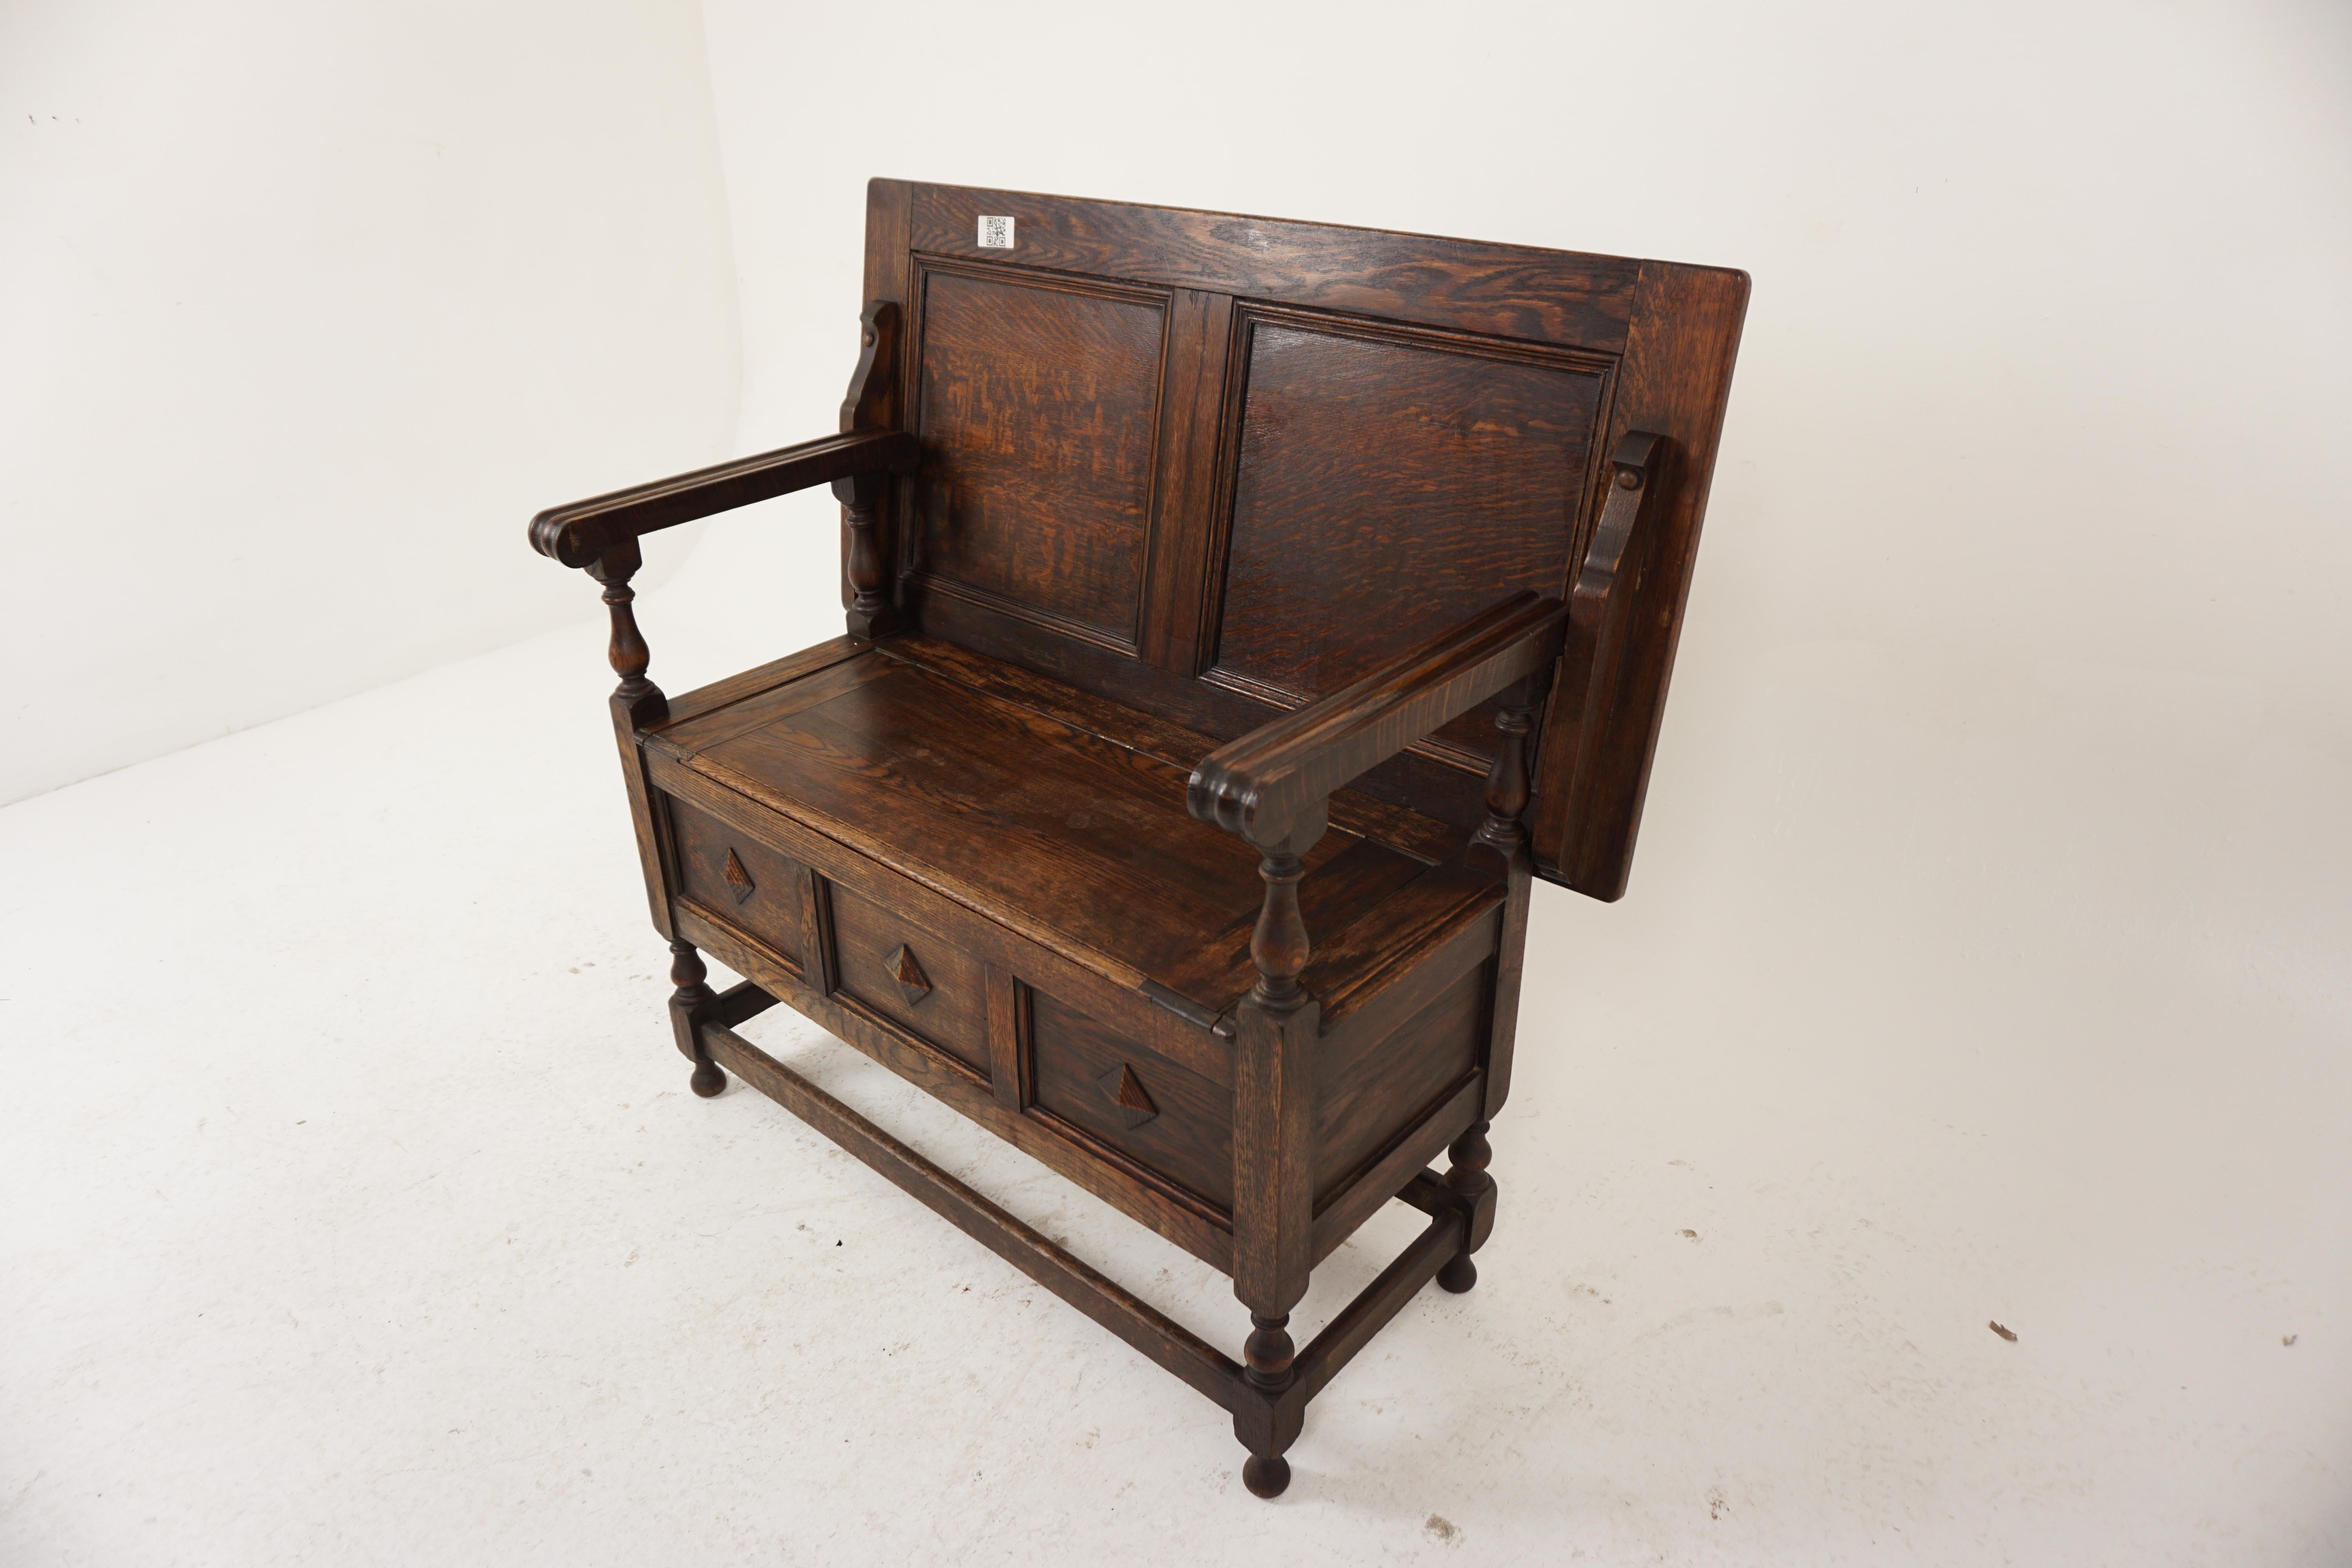 Antique Tiger Oak Monks Bench, Hall Seat, Settee, Scotland 1910, H989

Scotland 1910
Sold oak
Original finish
The bench has a panelled back with turned arm rest supports
The seat lifts up for storage
With three shaped panels underneath
All supported